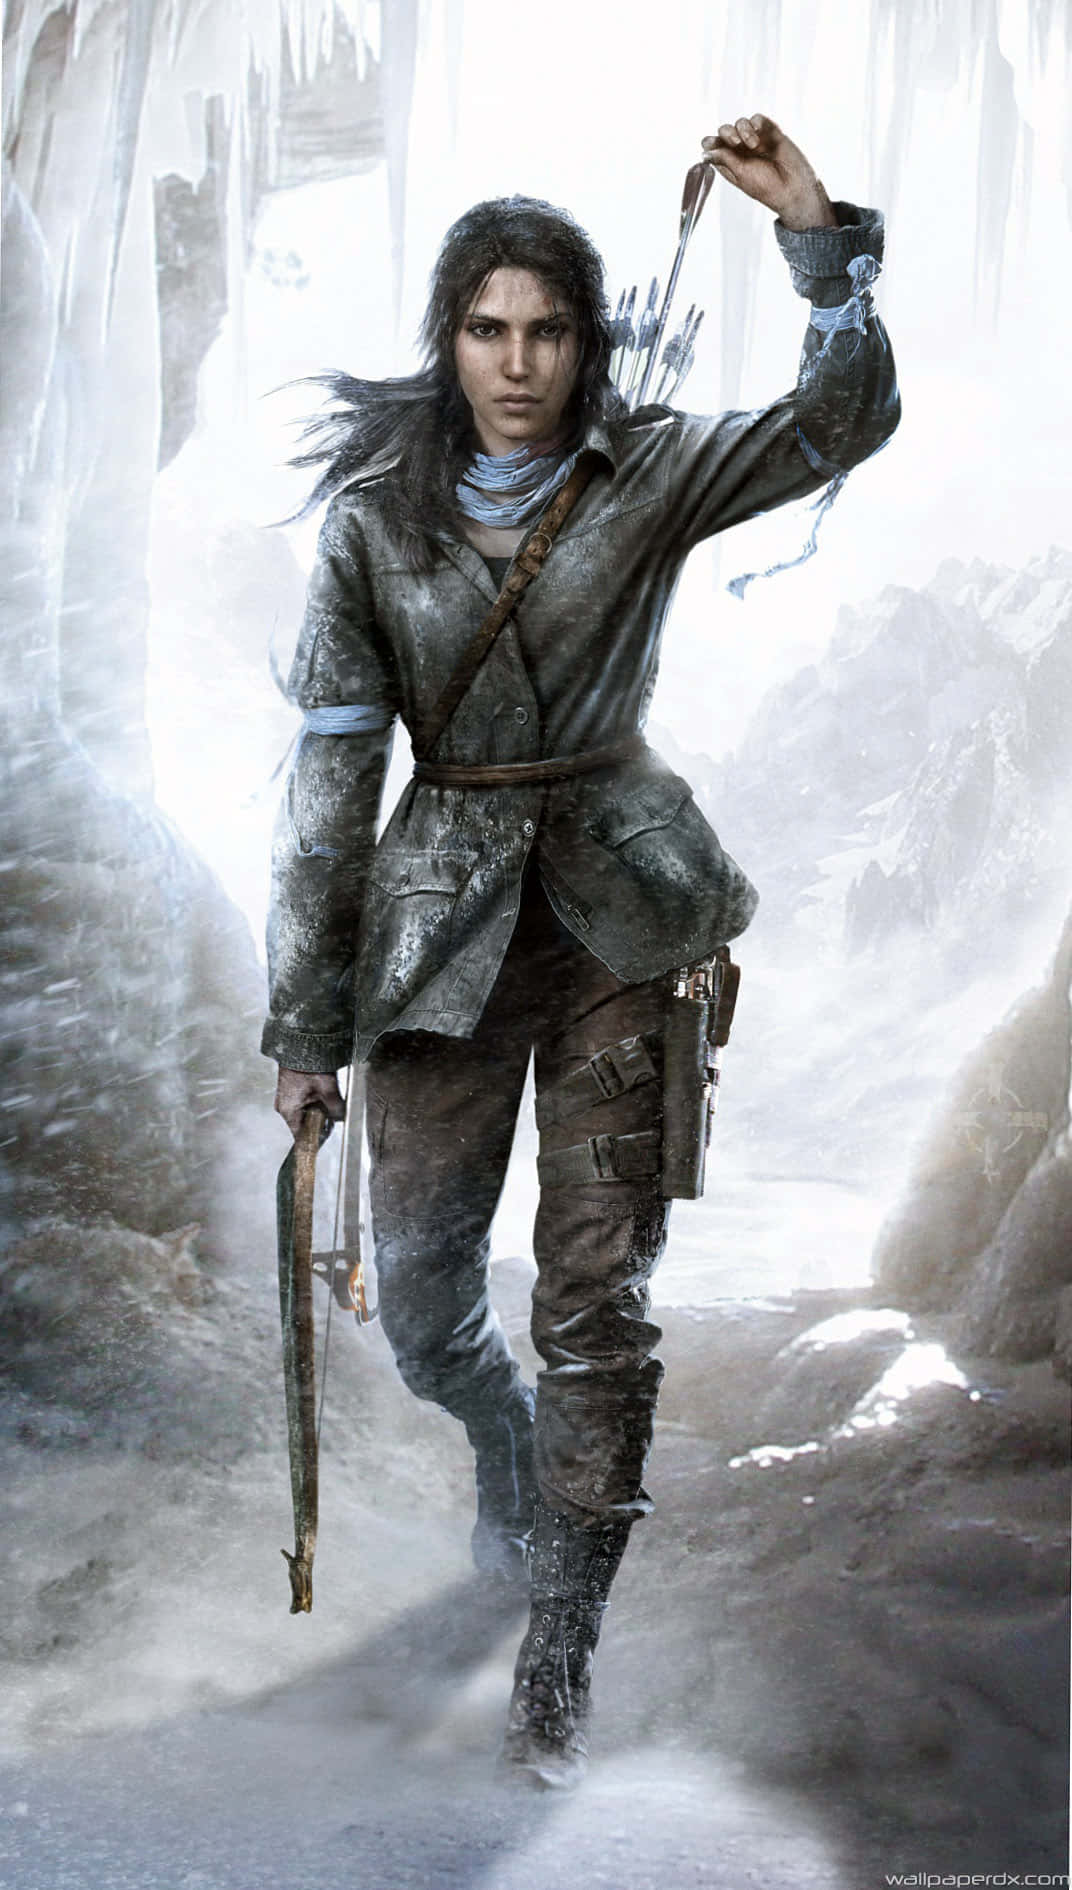 The Tomb Raider - A Woman In A Snowy Cave